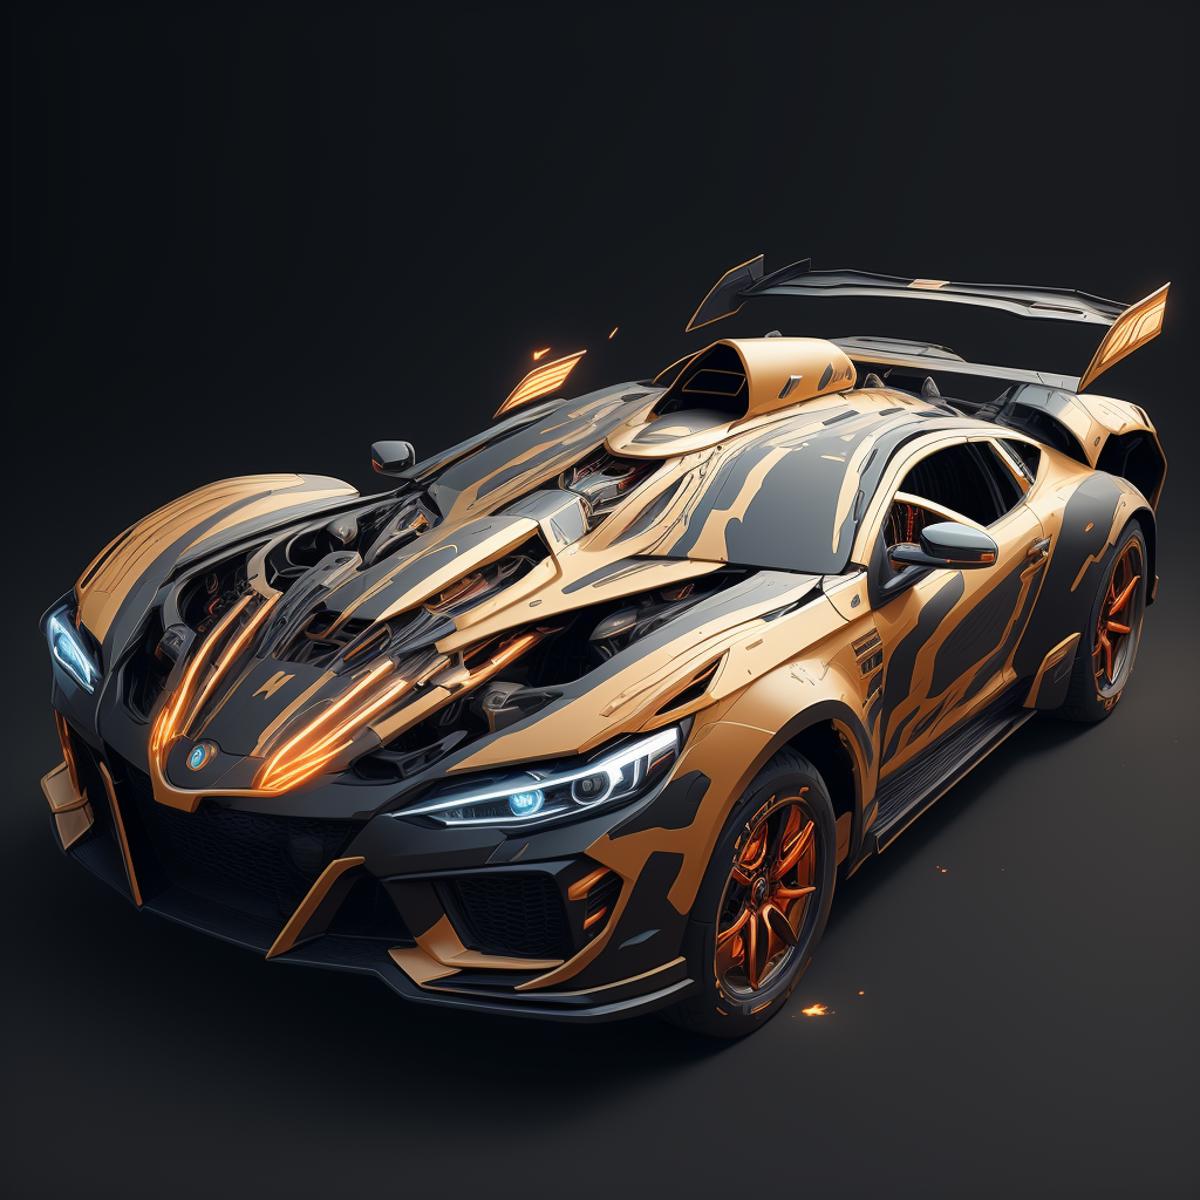 game icon institute-car image by ConceptConnoisseur